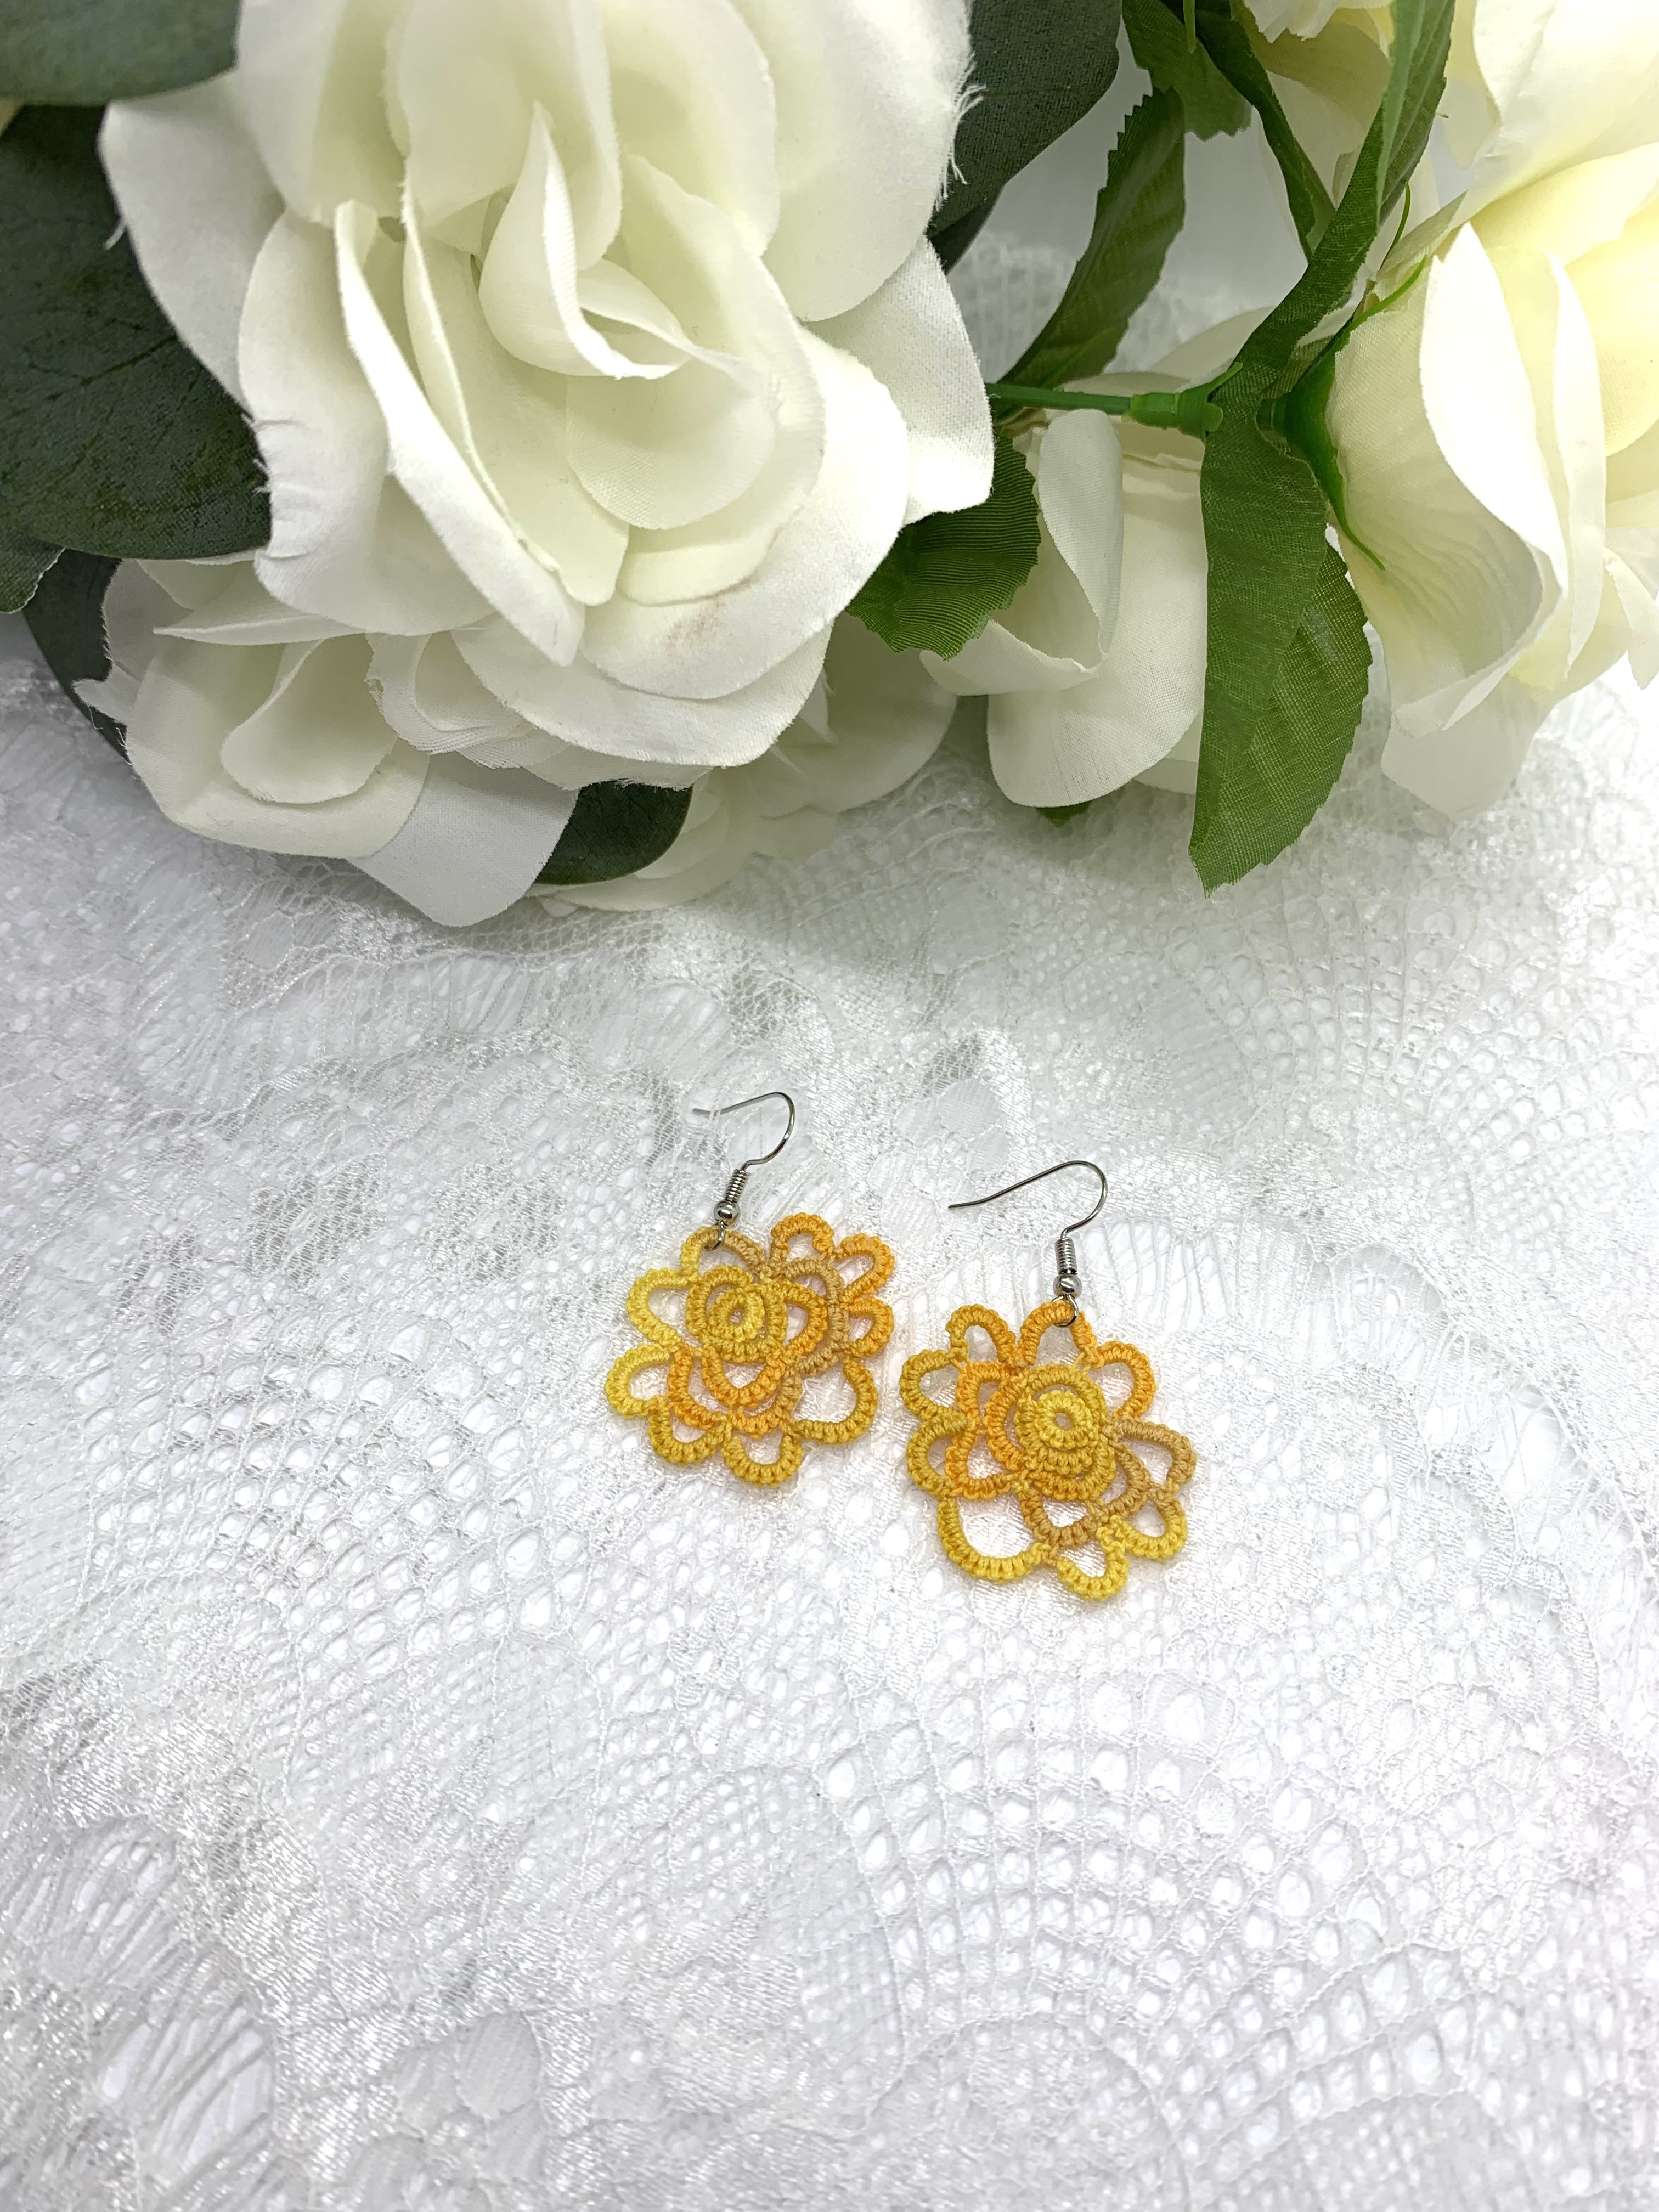 Handmade lace earrings in rose theme yellow color